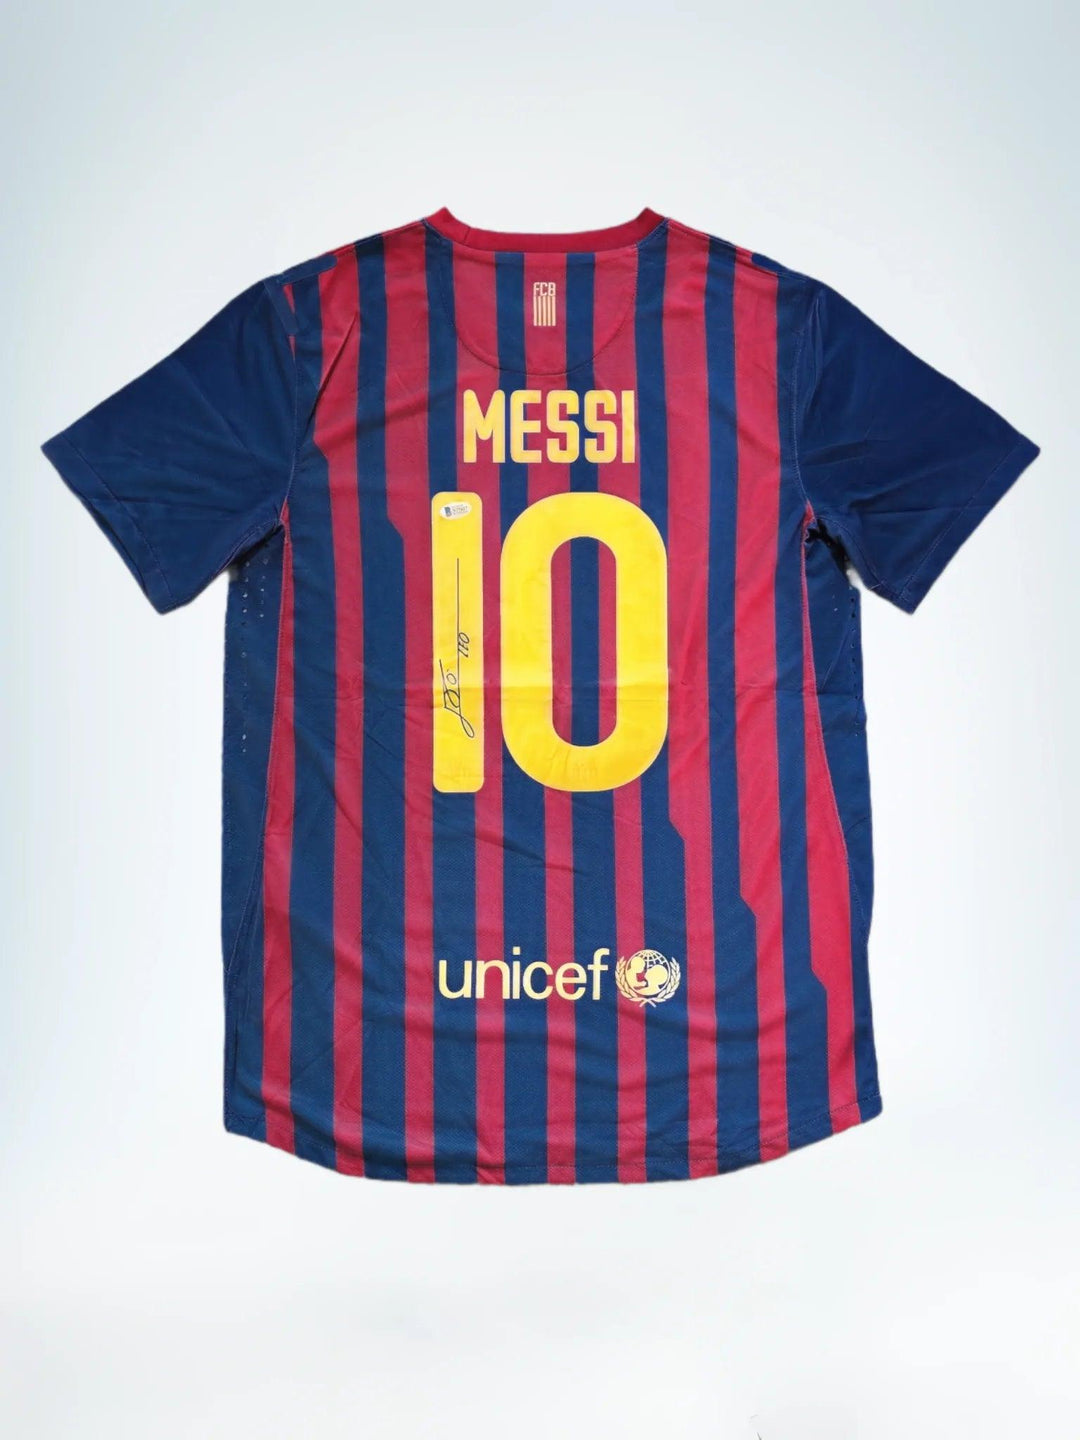 Lionel Messi 10 FC Barcelona 2011-2012 - Signed Soccer Jersey | Historic 91-Goal Record